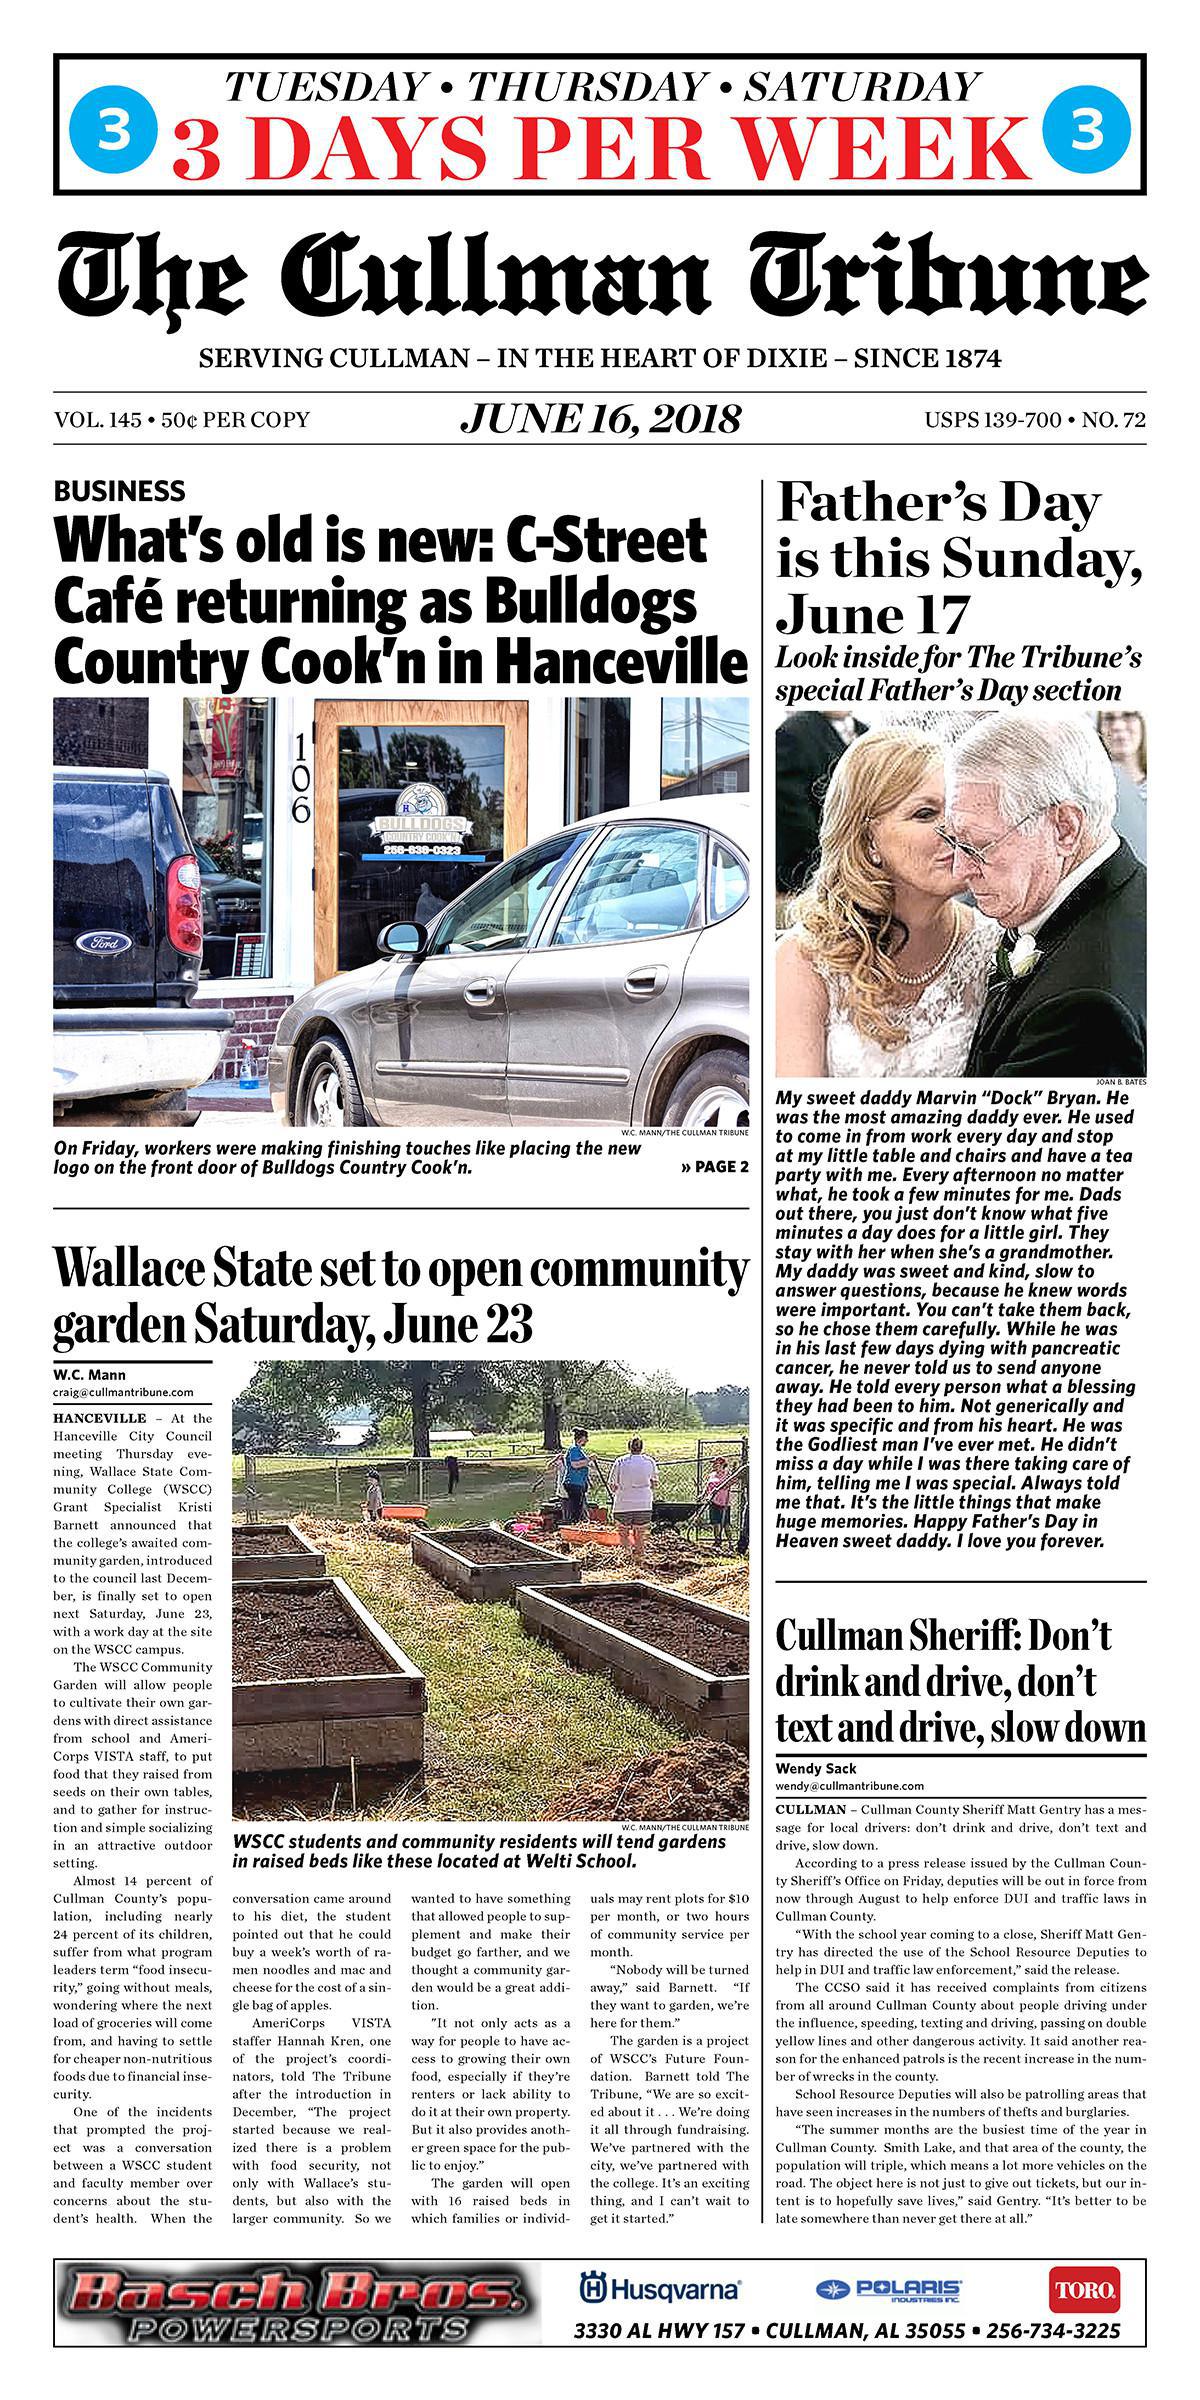 Good Morning Cullman! The 06-16-2018 edition of the Cullman Tribune is now ready to view